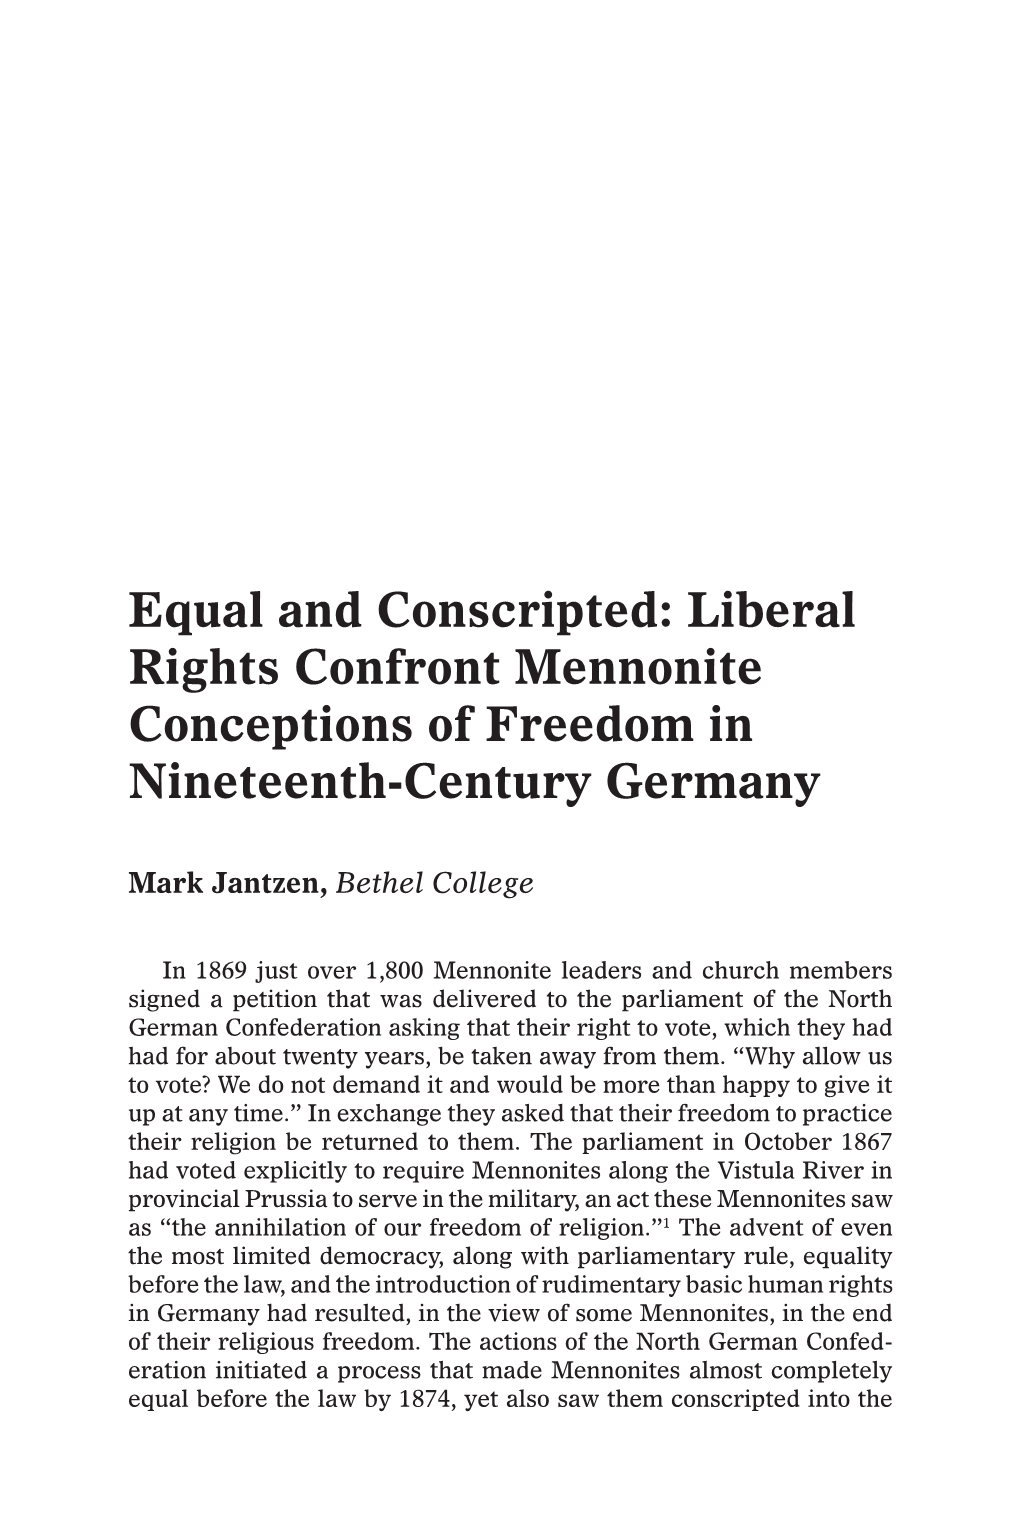 Liberal Rights Confront Mennonite Conceptions of Freedom in Nineteenth-Century Germany